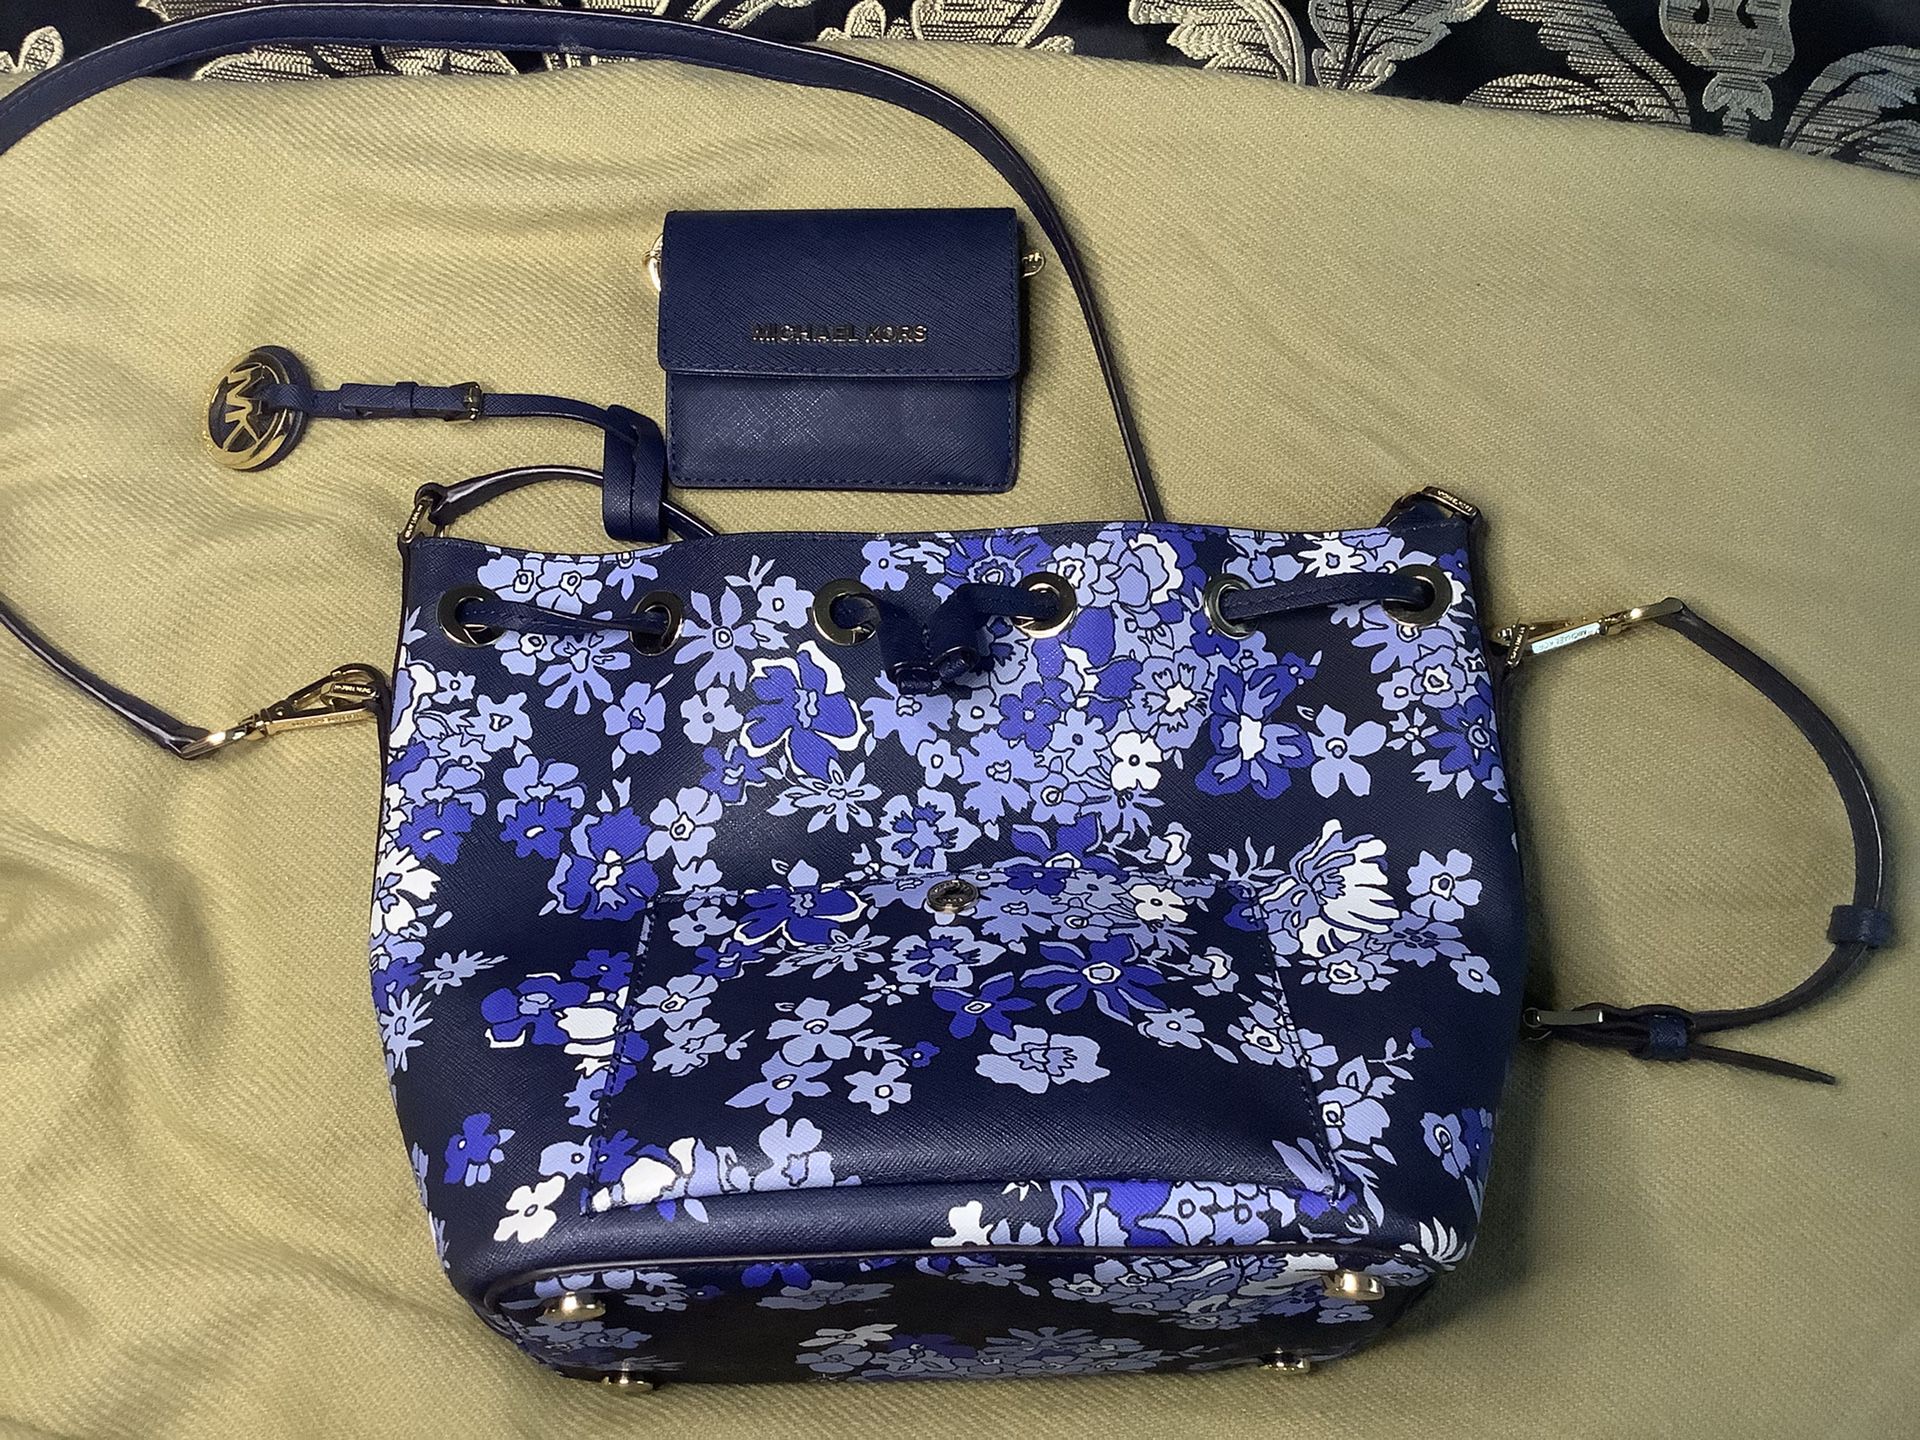 Blue Michael Kors Bucket Purse With Wallet And Black Bag With Make Up Bag